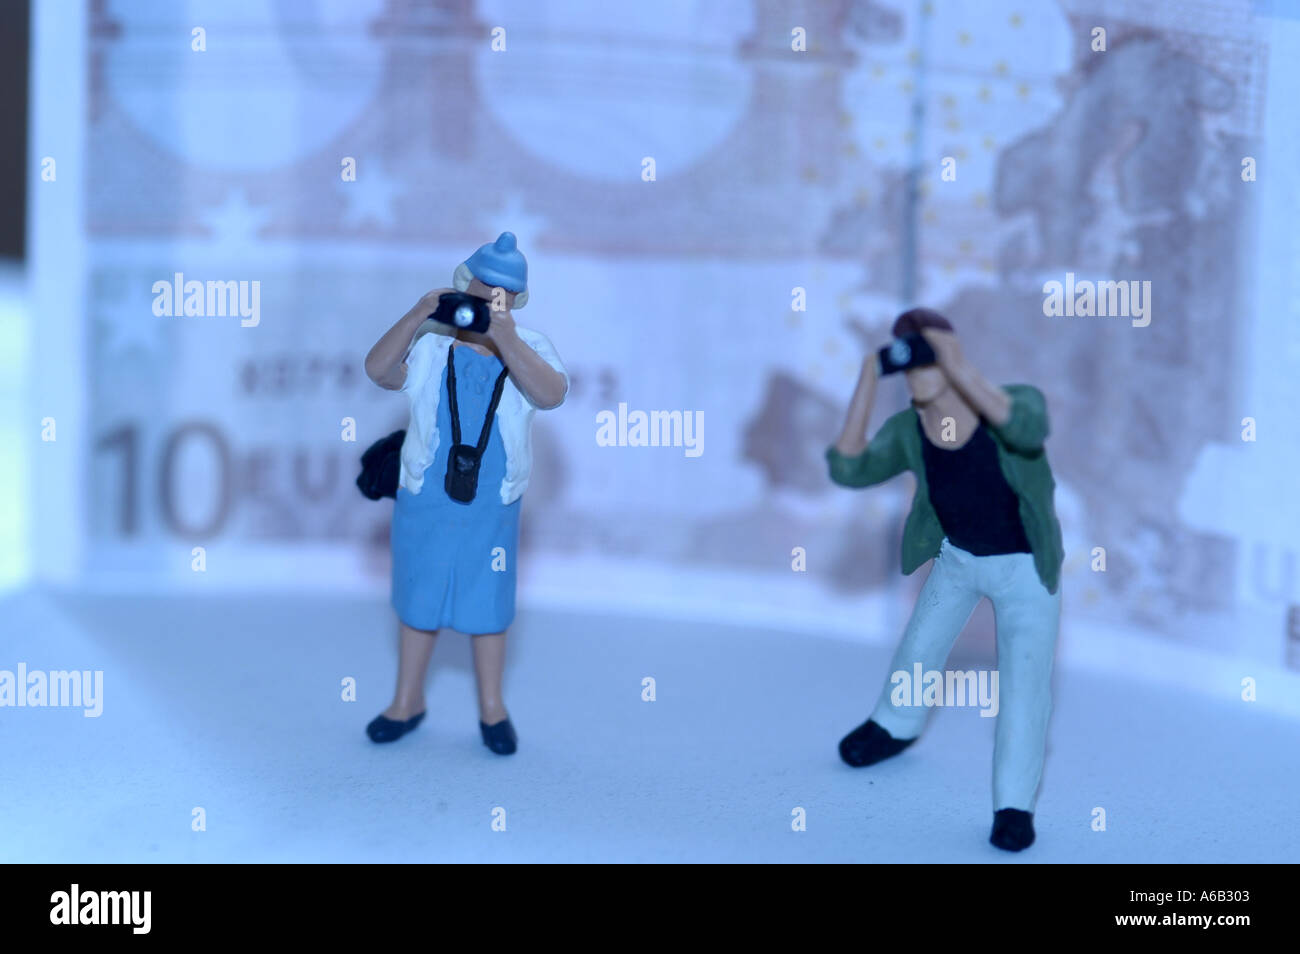 Miniature man and woman taking photos against a backdrop of a 10 Euro bill. Stock Photo